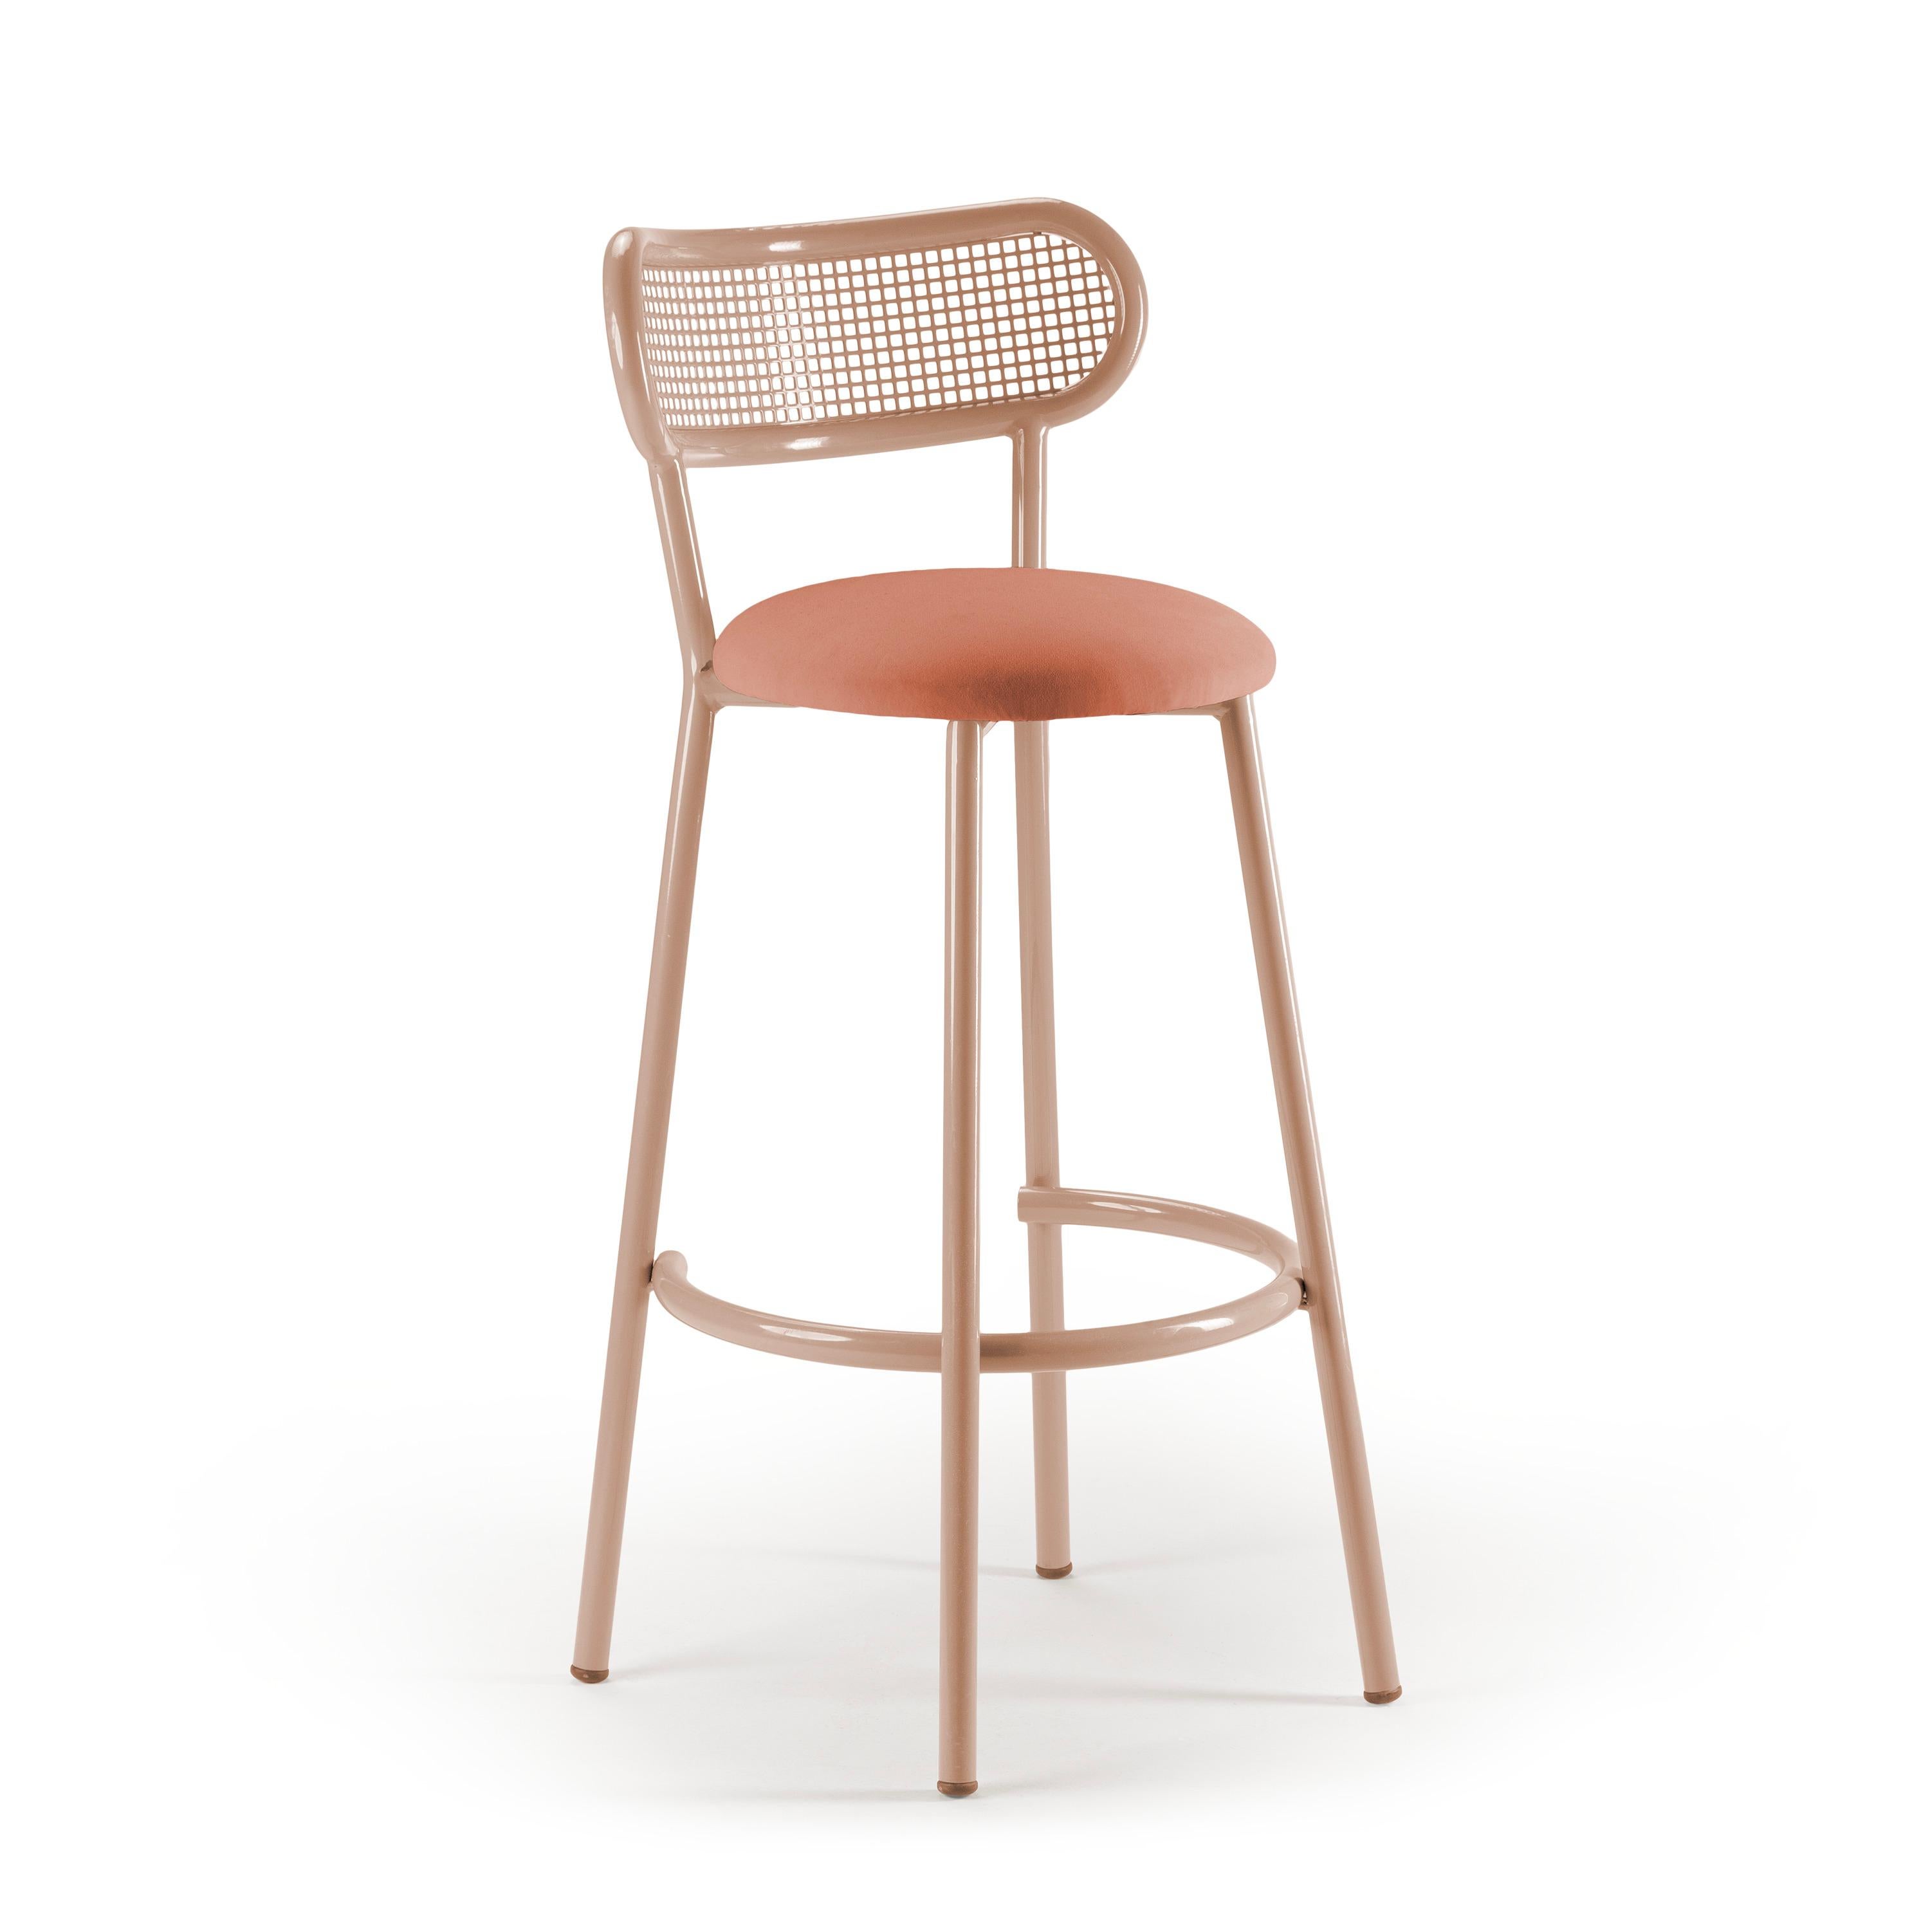 Intended for modern working, dining, and living, the Louise chair combines a clean, steel structure, perforated steel back and upholstery resulting in an effortless modern classic that is perfectly proportioned.
The Louise chairs can evoke such